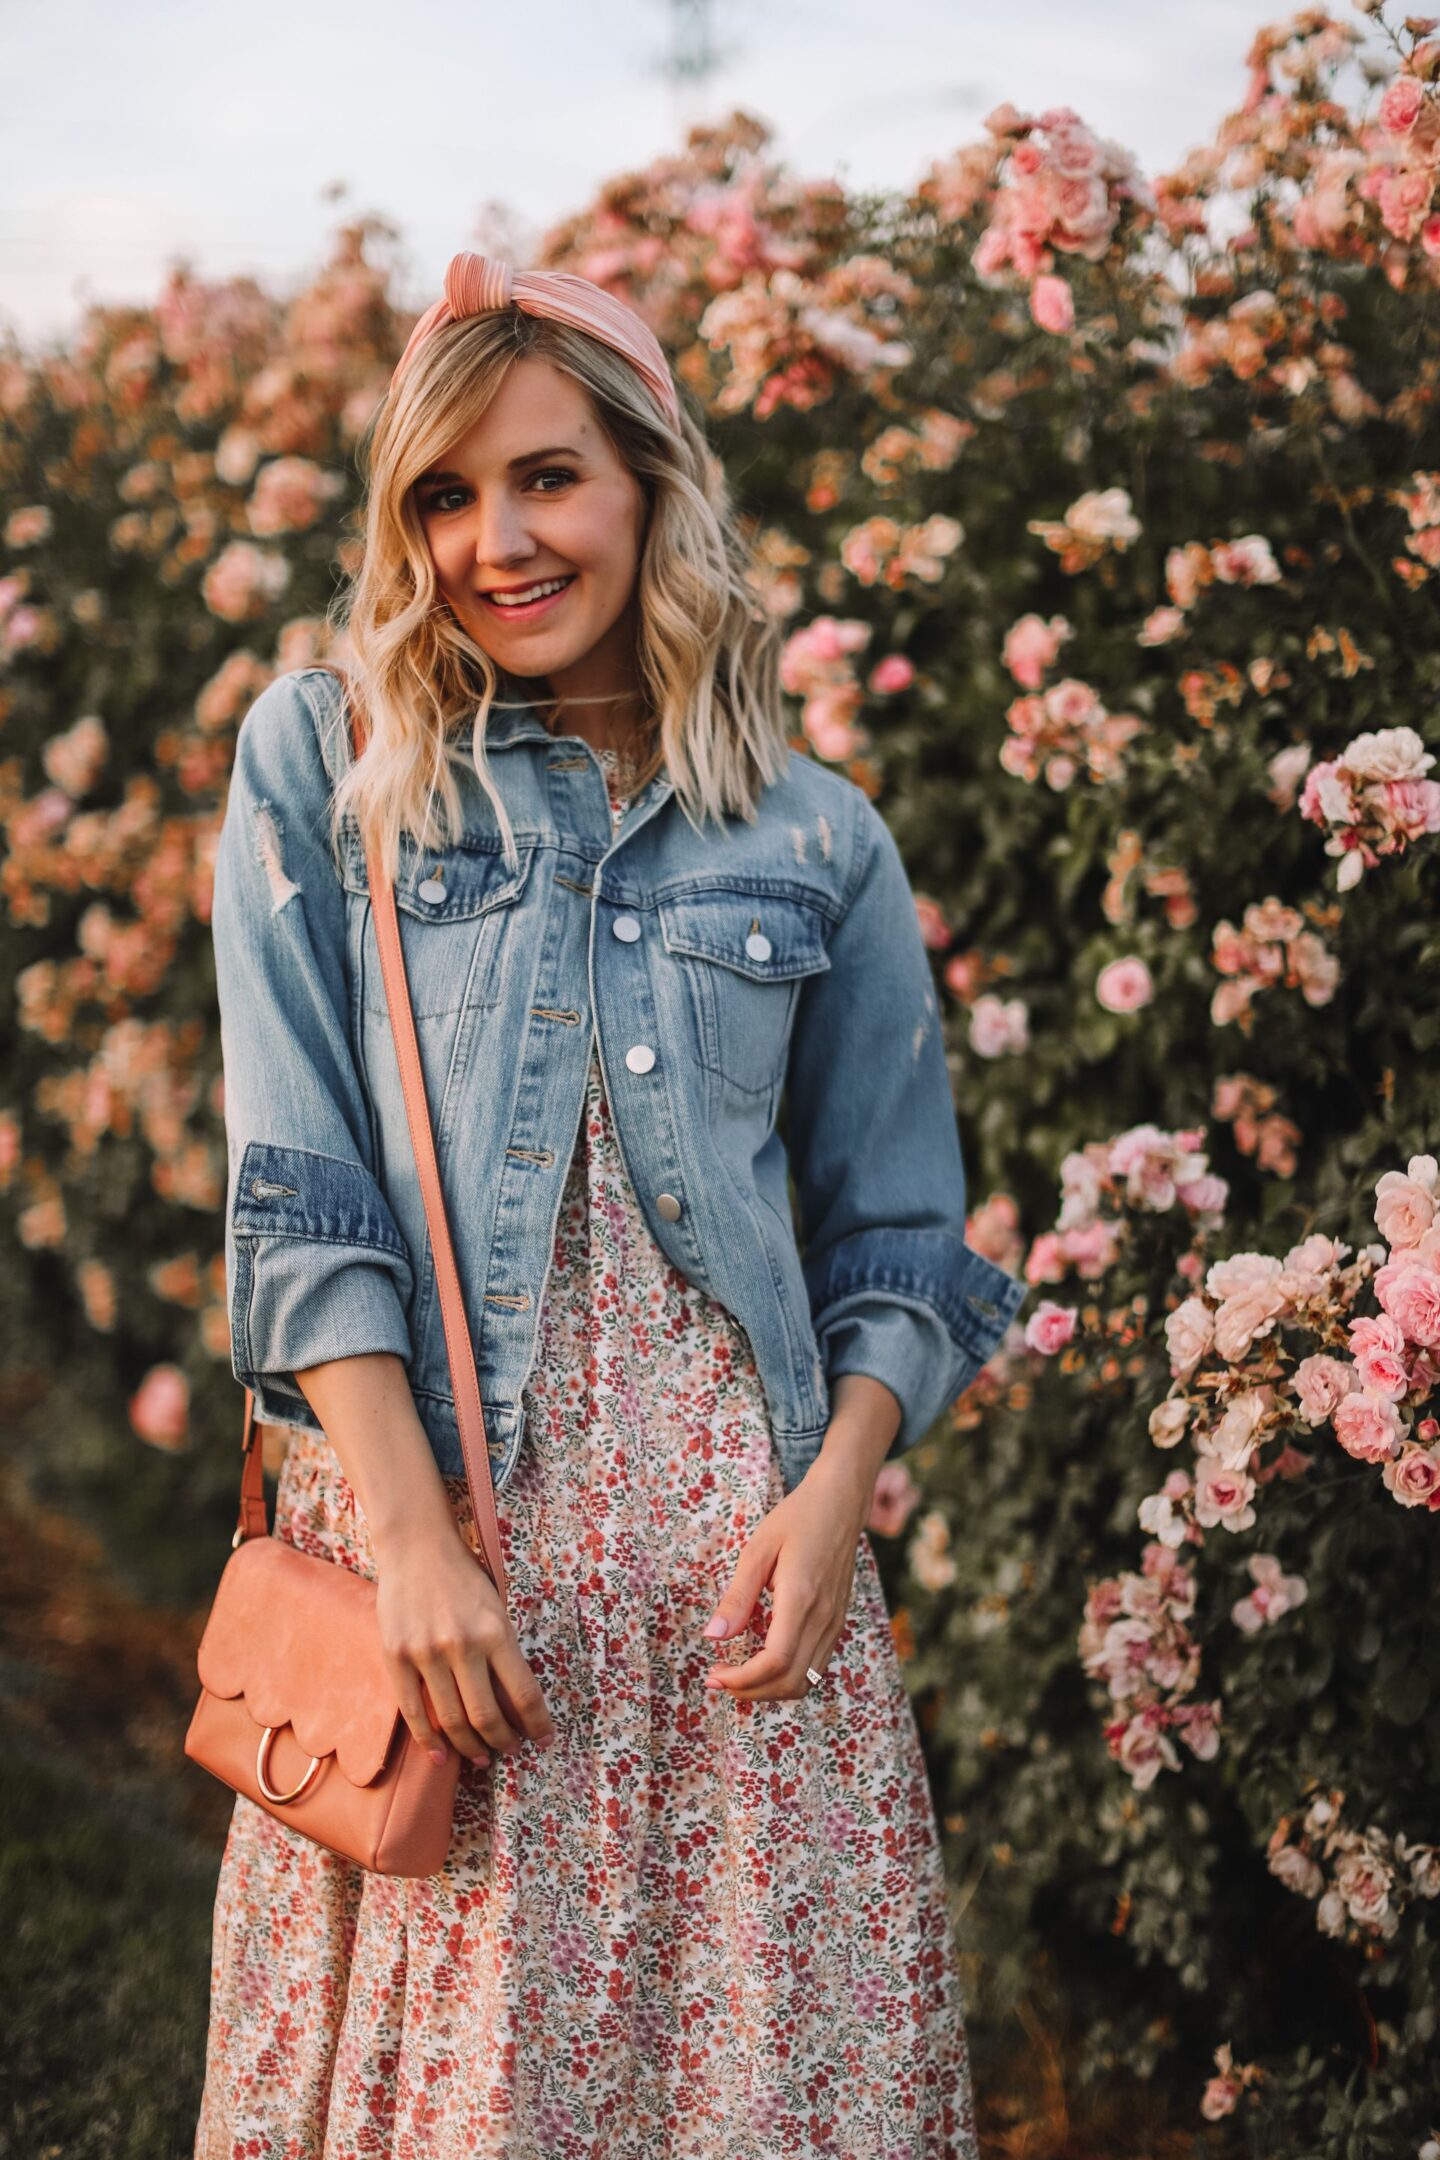 How to Wear a Denim Jacket - Stylish Spring Look! by People & Styles